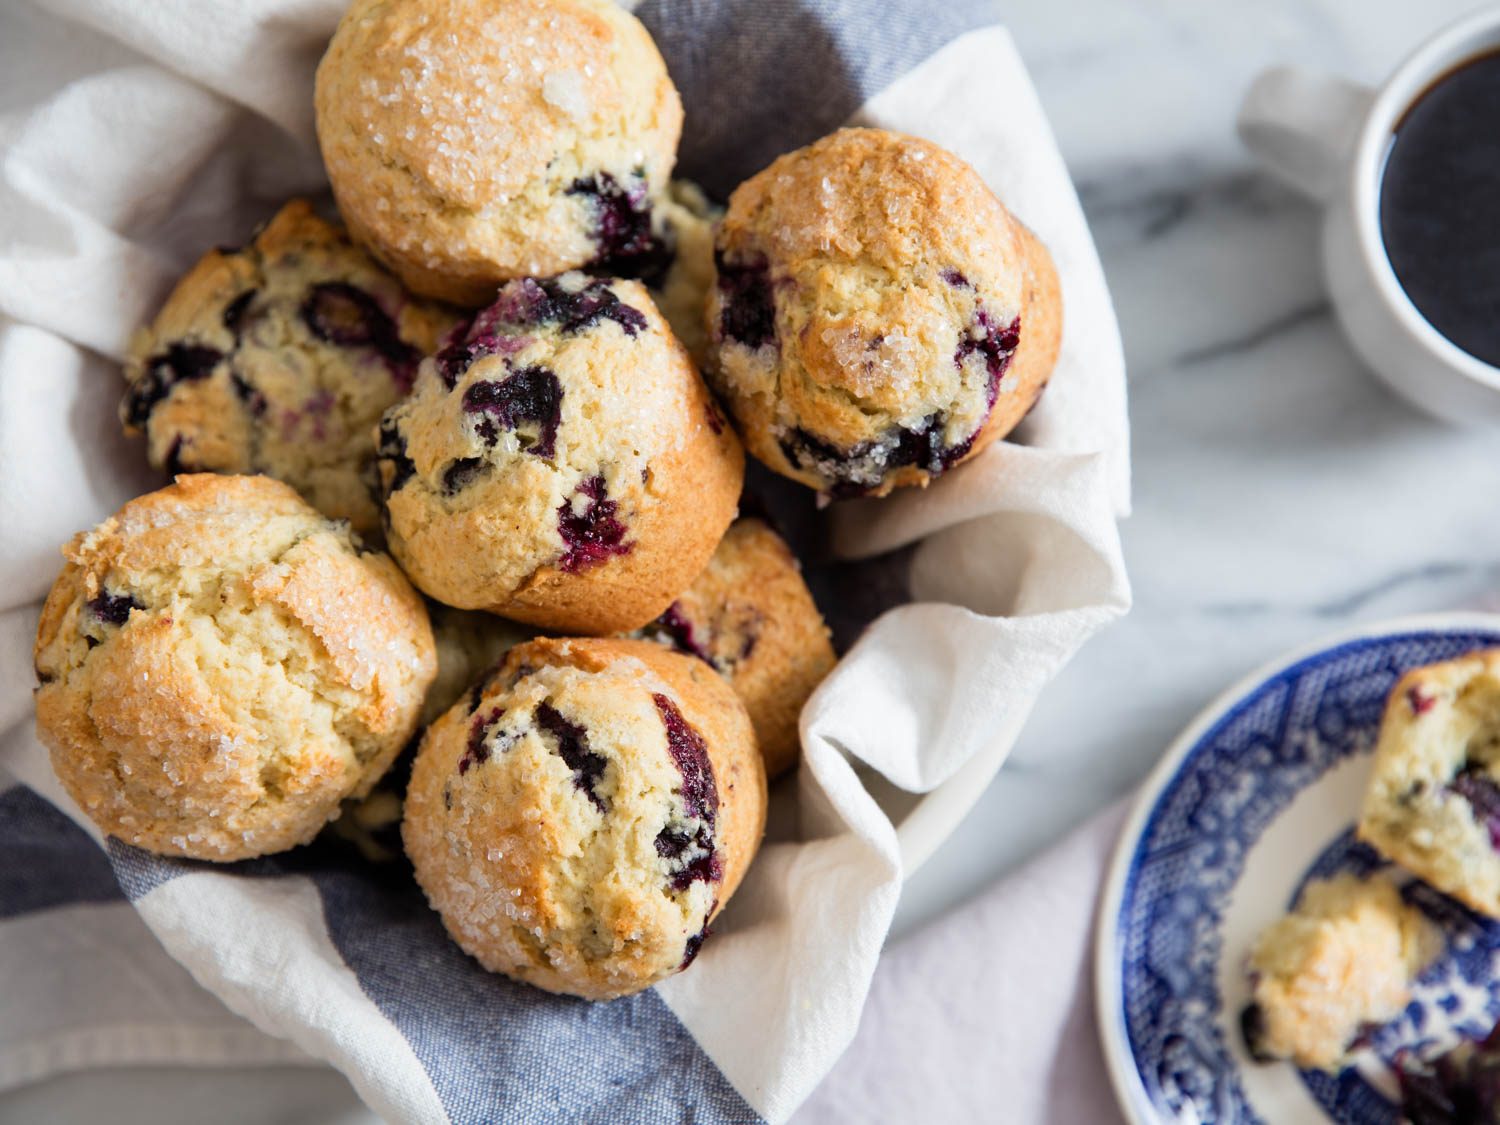 🥞 Sorry, Only Real Foodies Have Eaten at Least 17/24 of These Delicious Brunch Foods Blueberry Muffins